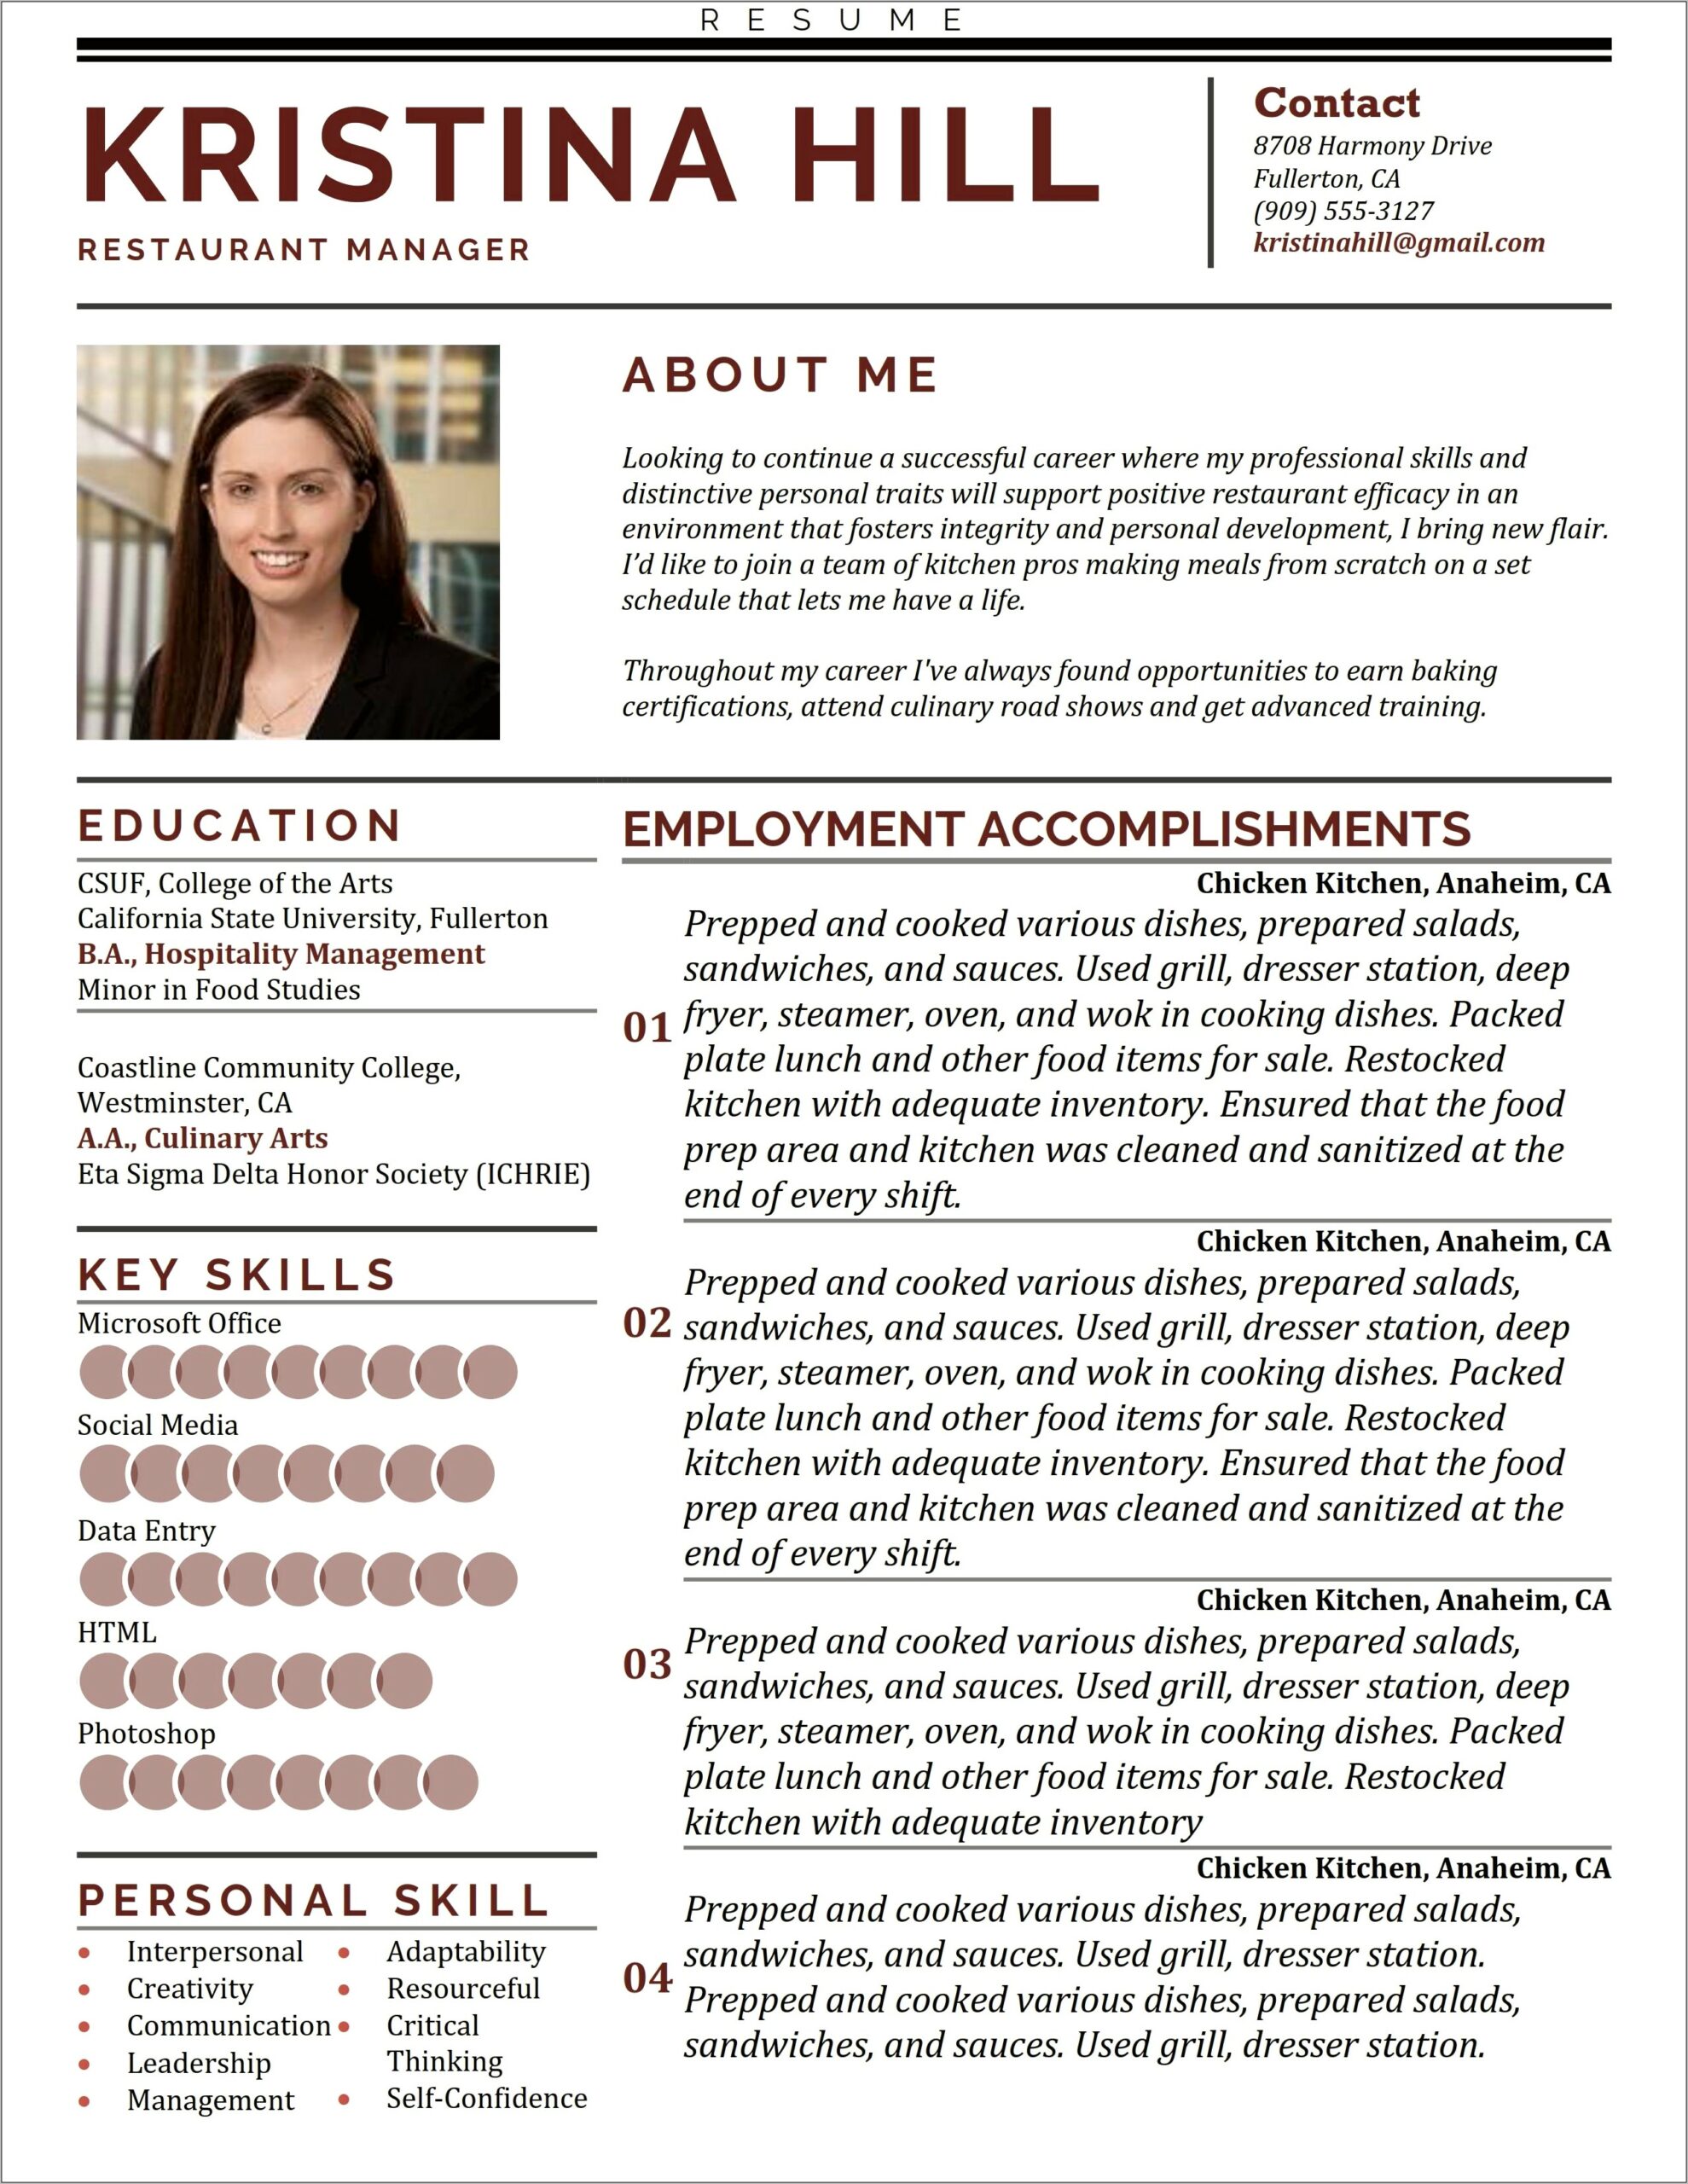 ms-word-resume-templates-free-functional-format-resume-example-gallery